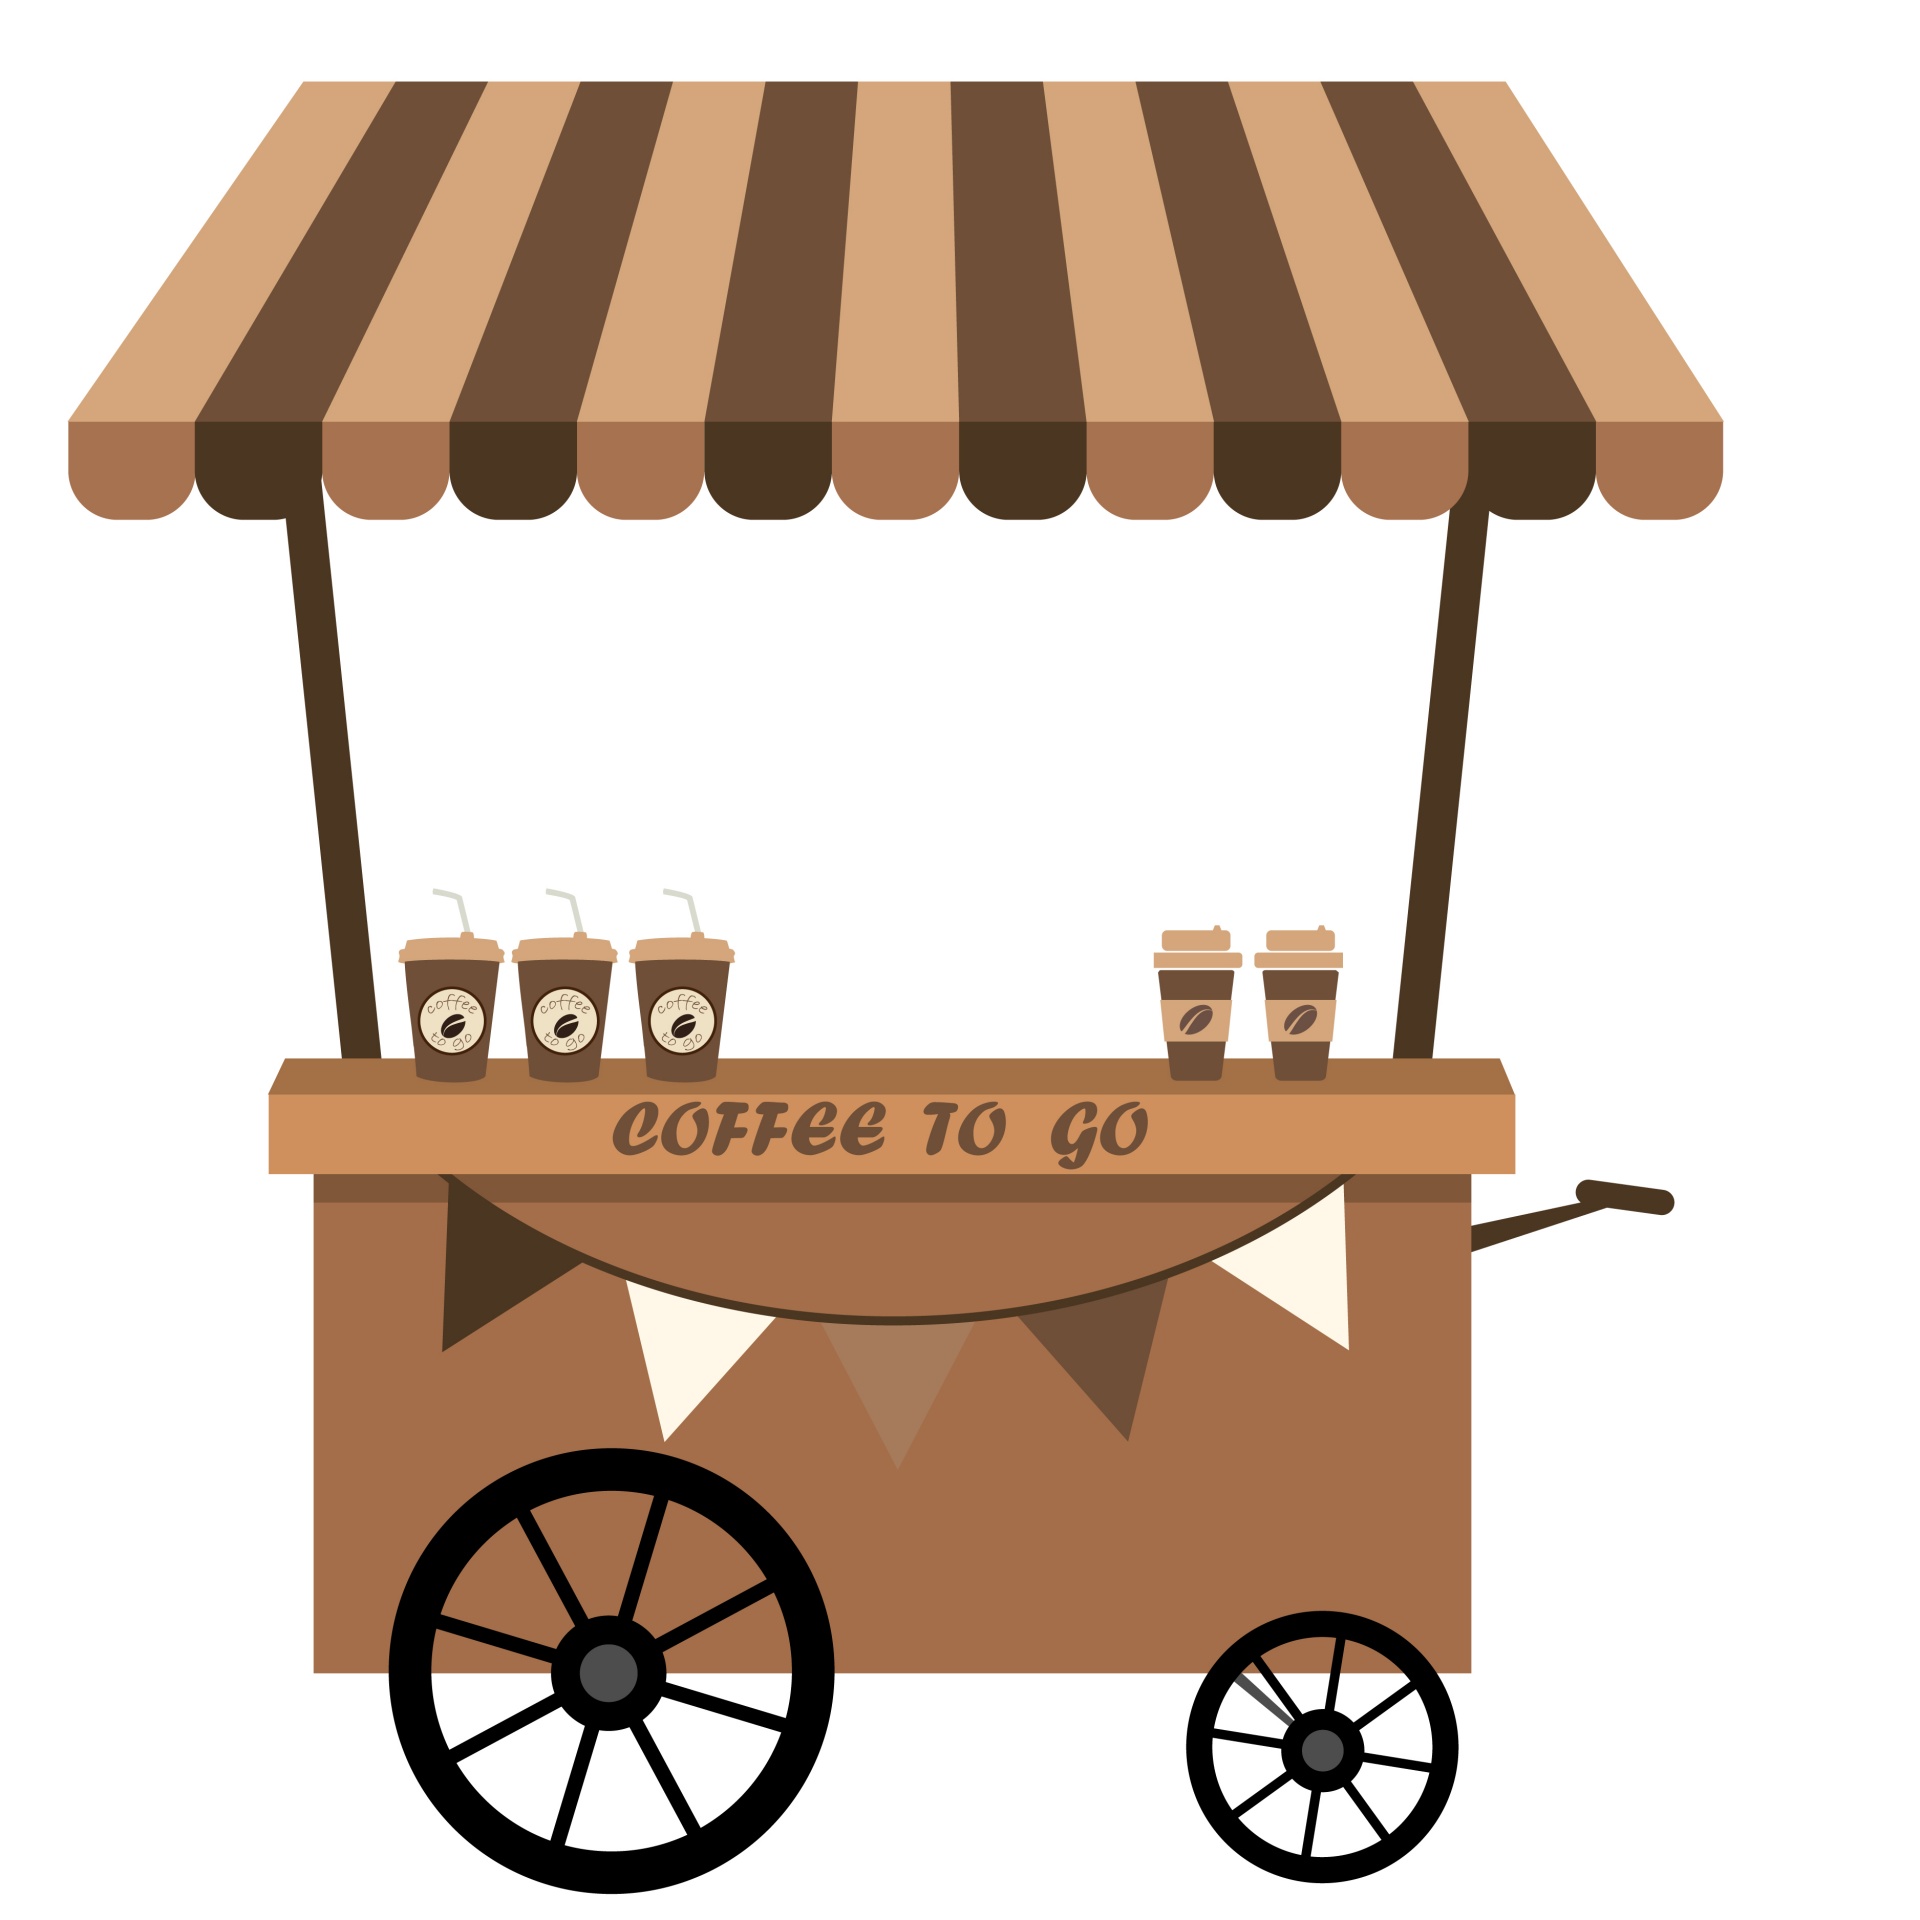 Coffee cart mobile takeaway clipart illustration